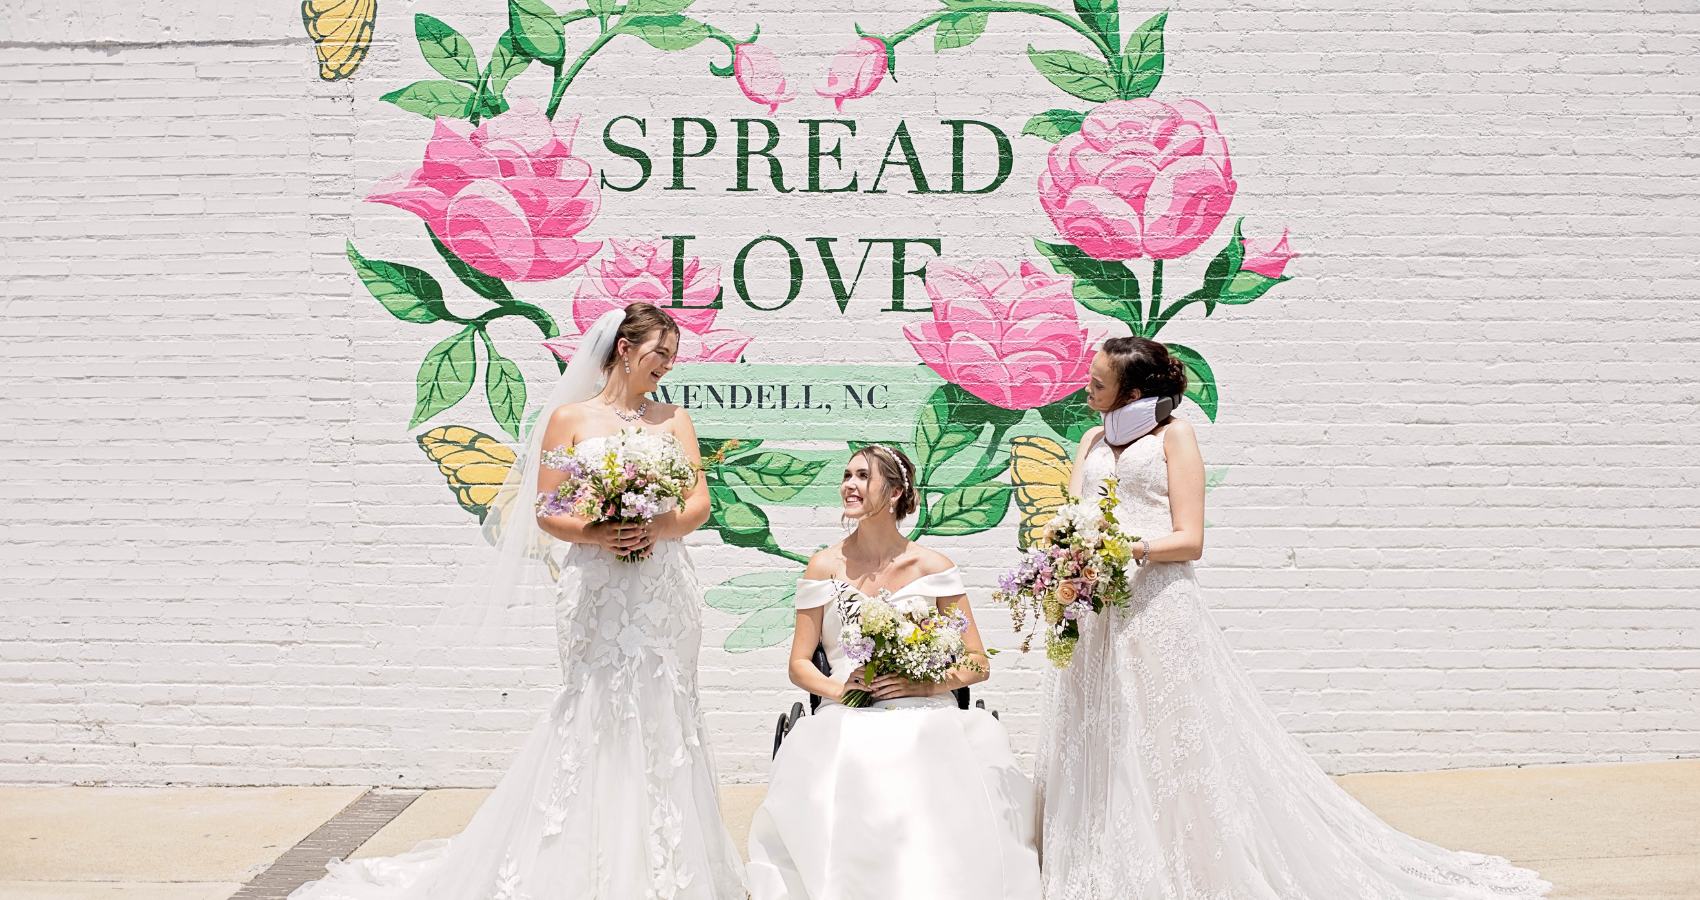 Inclusivity in Fashion with All Bodies All Brides